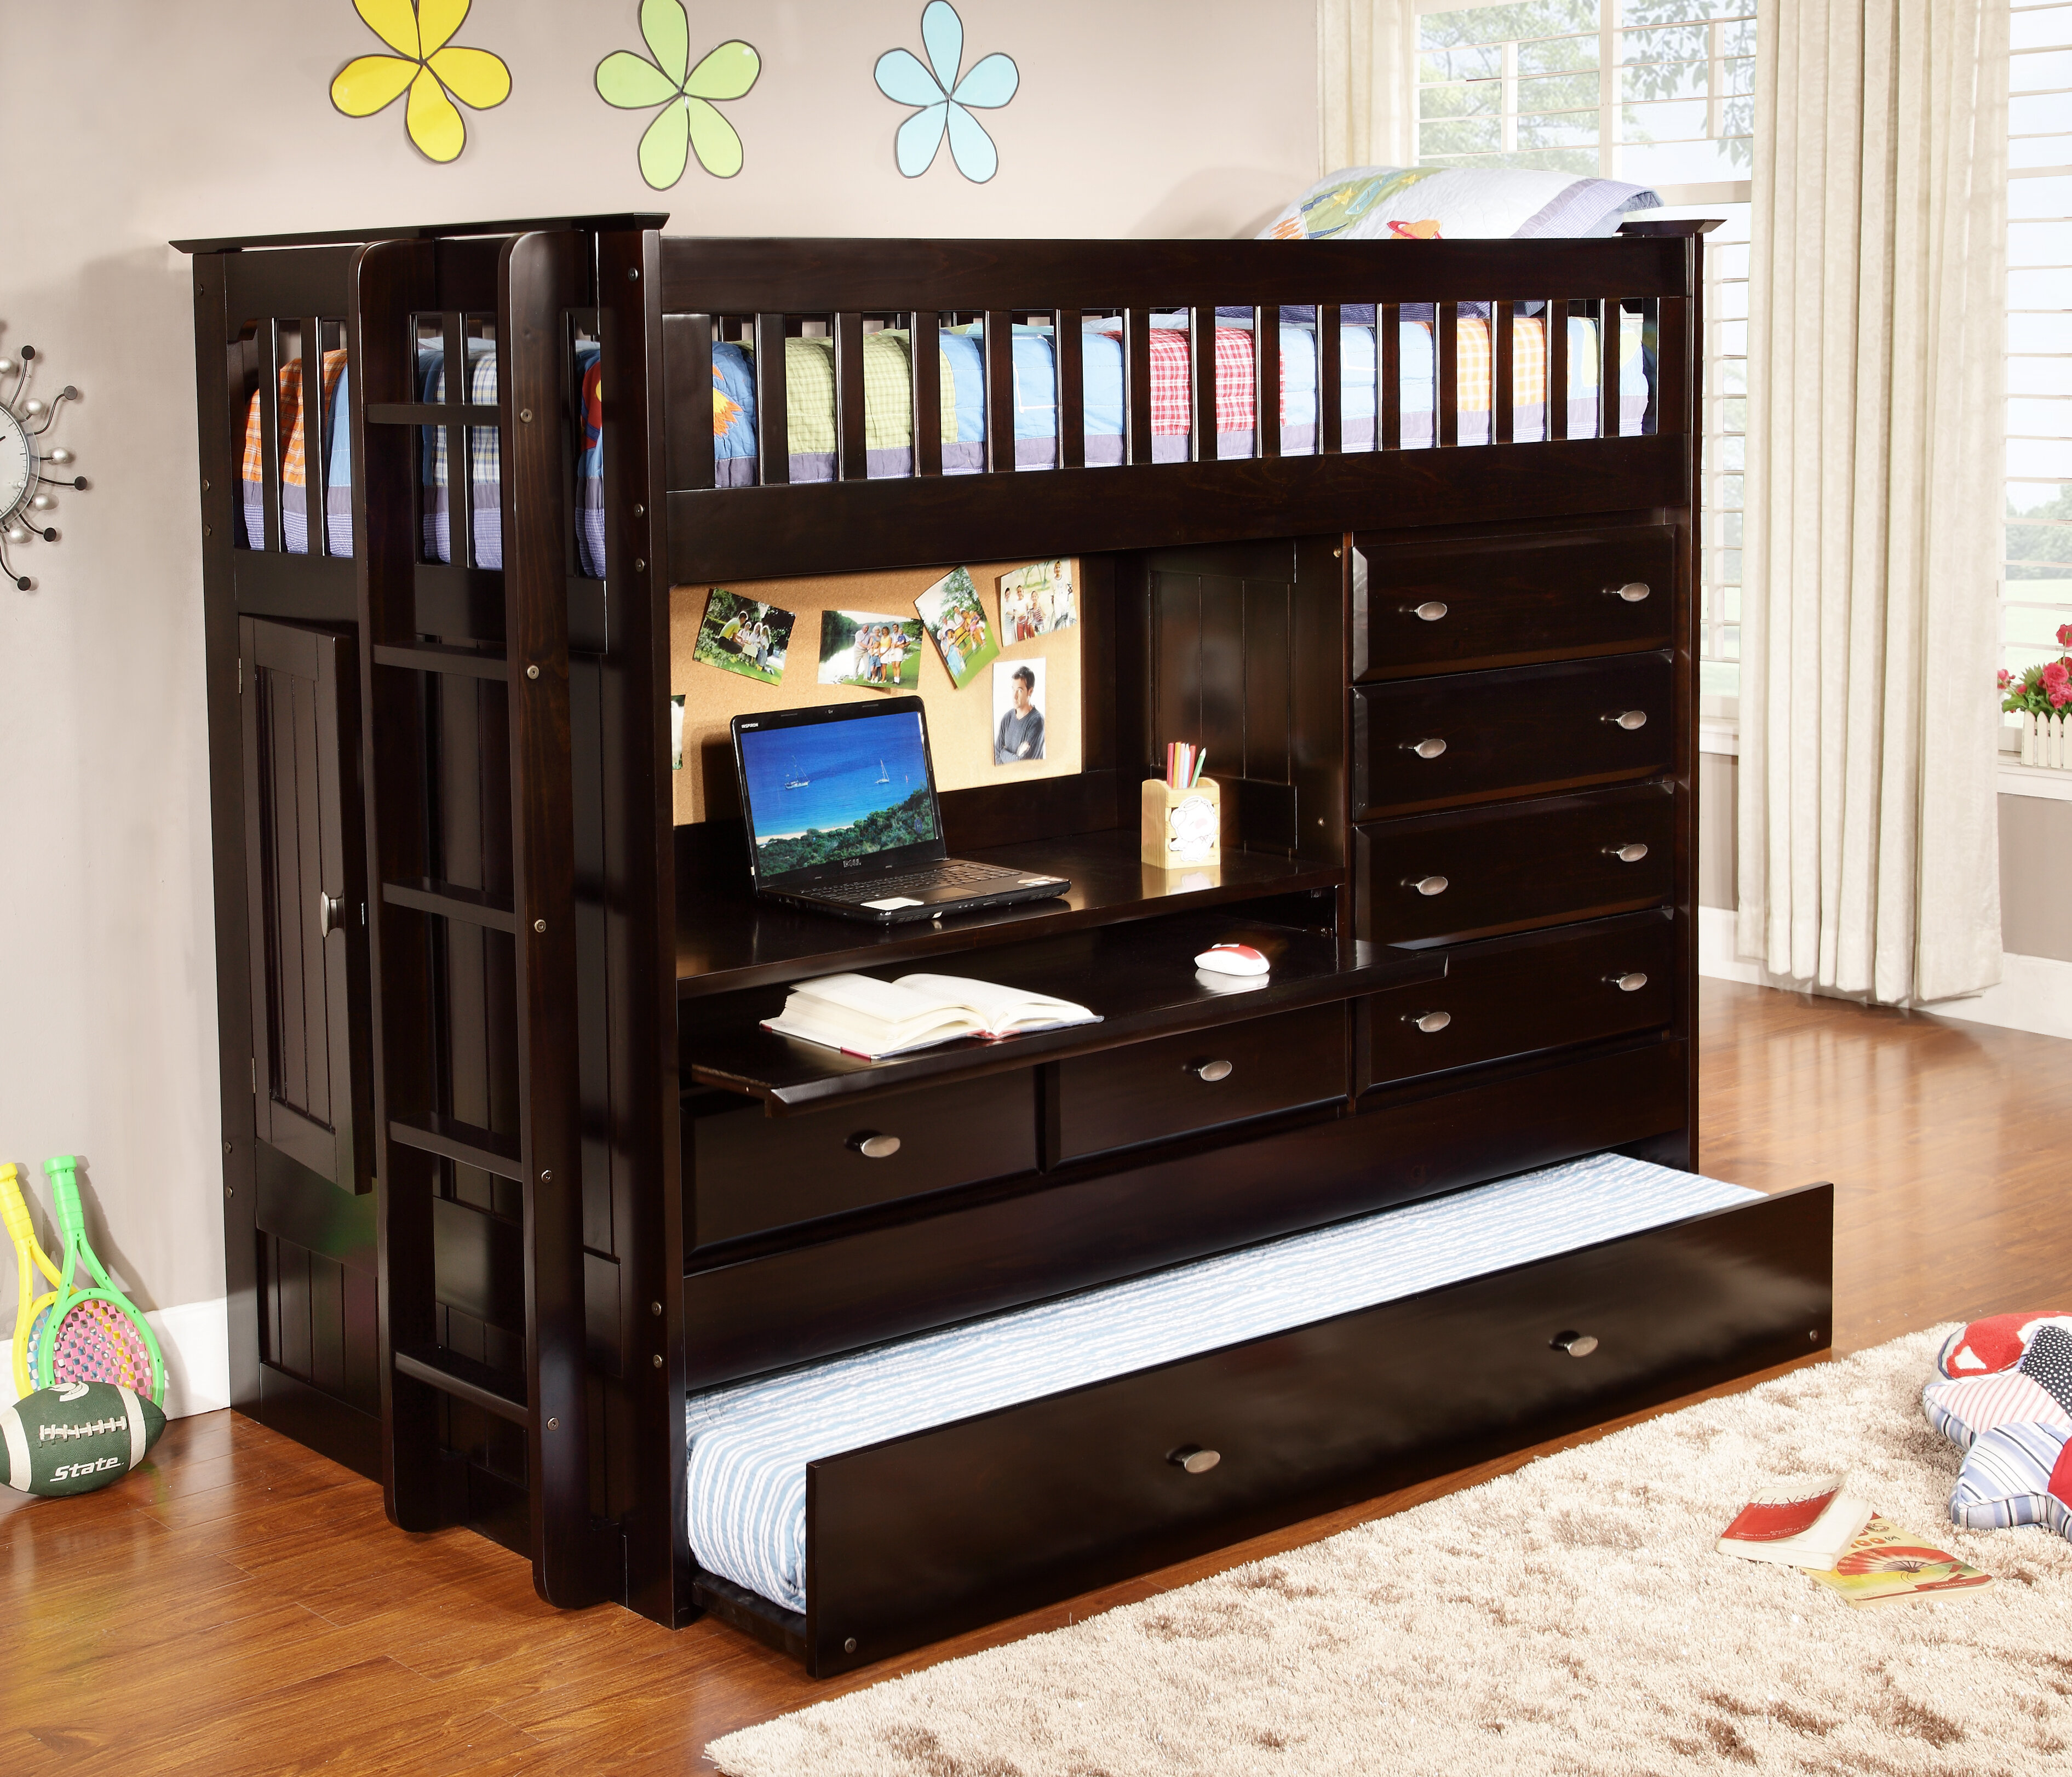 loft bed with trundle